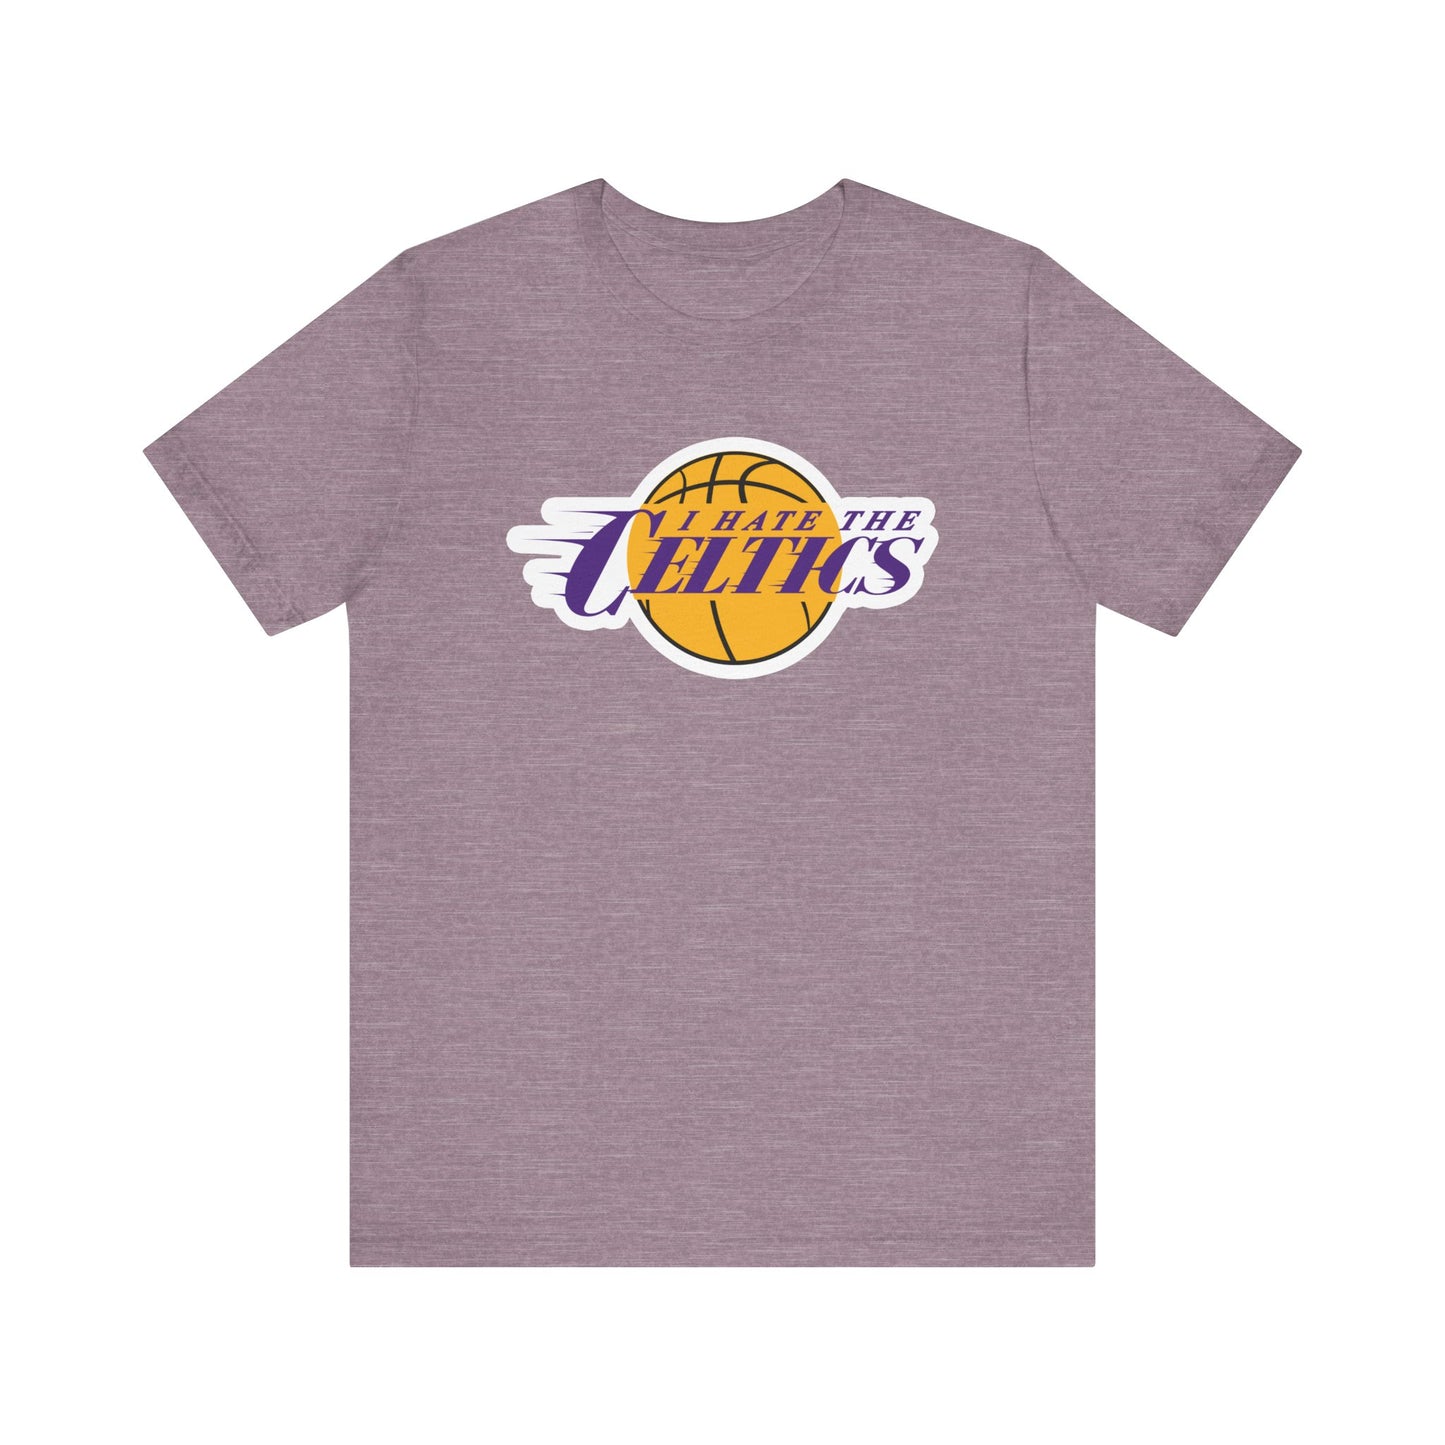 I Hate The Boston Team (for Lake Show fans) - Unisex Jersey Short Sleeve Tee